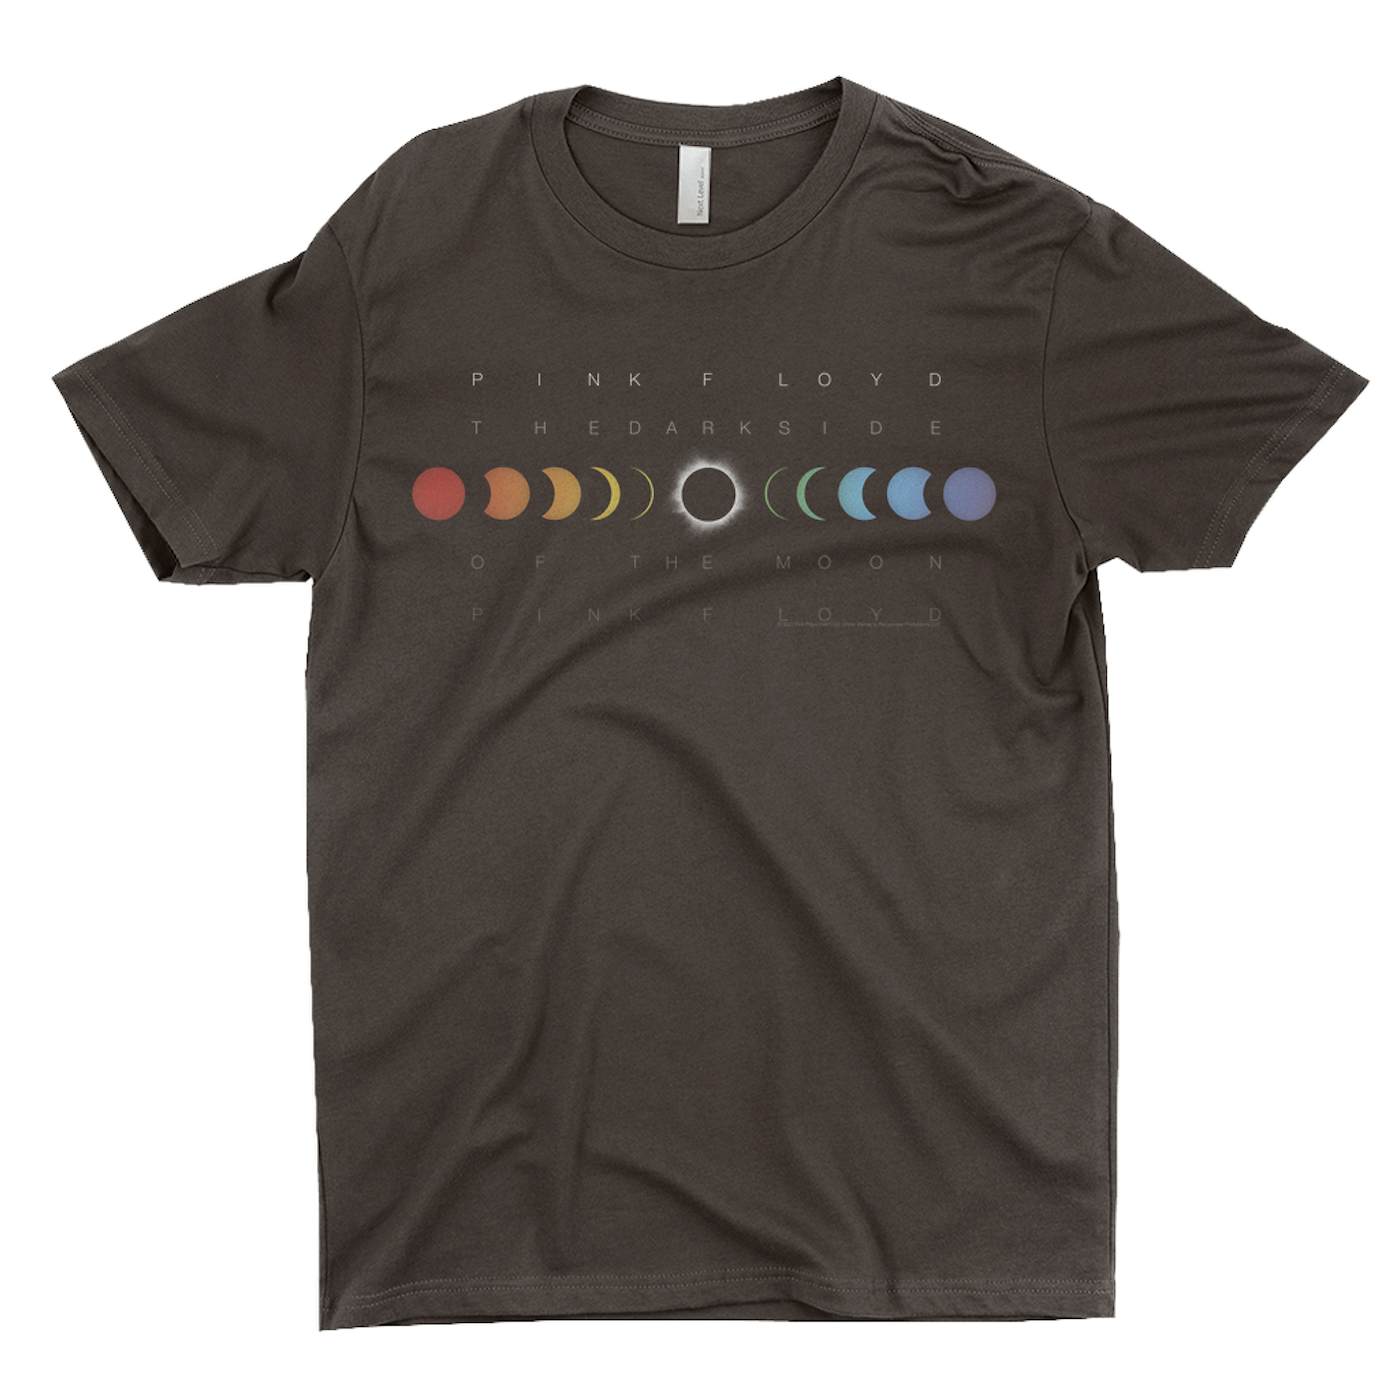 Pink Floyd T-Shirt | Eclipse In Color Pink Floyd Shirt